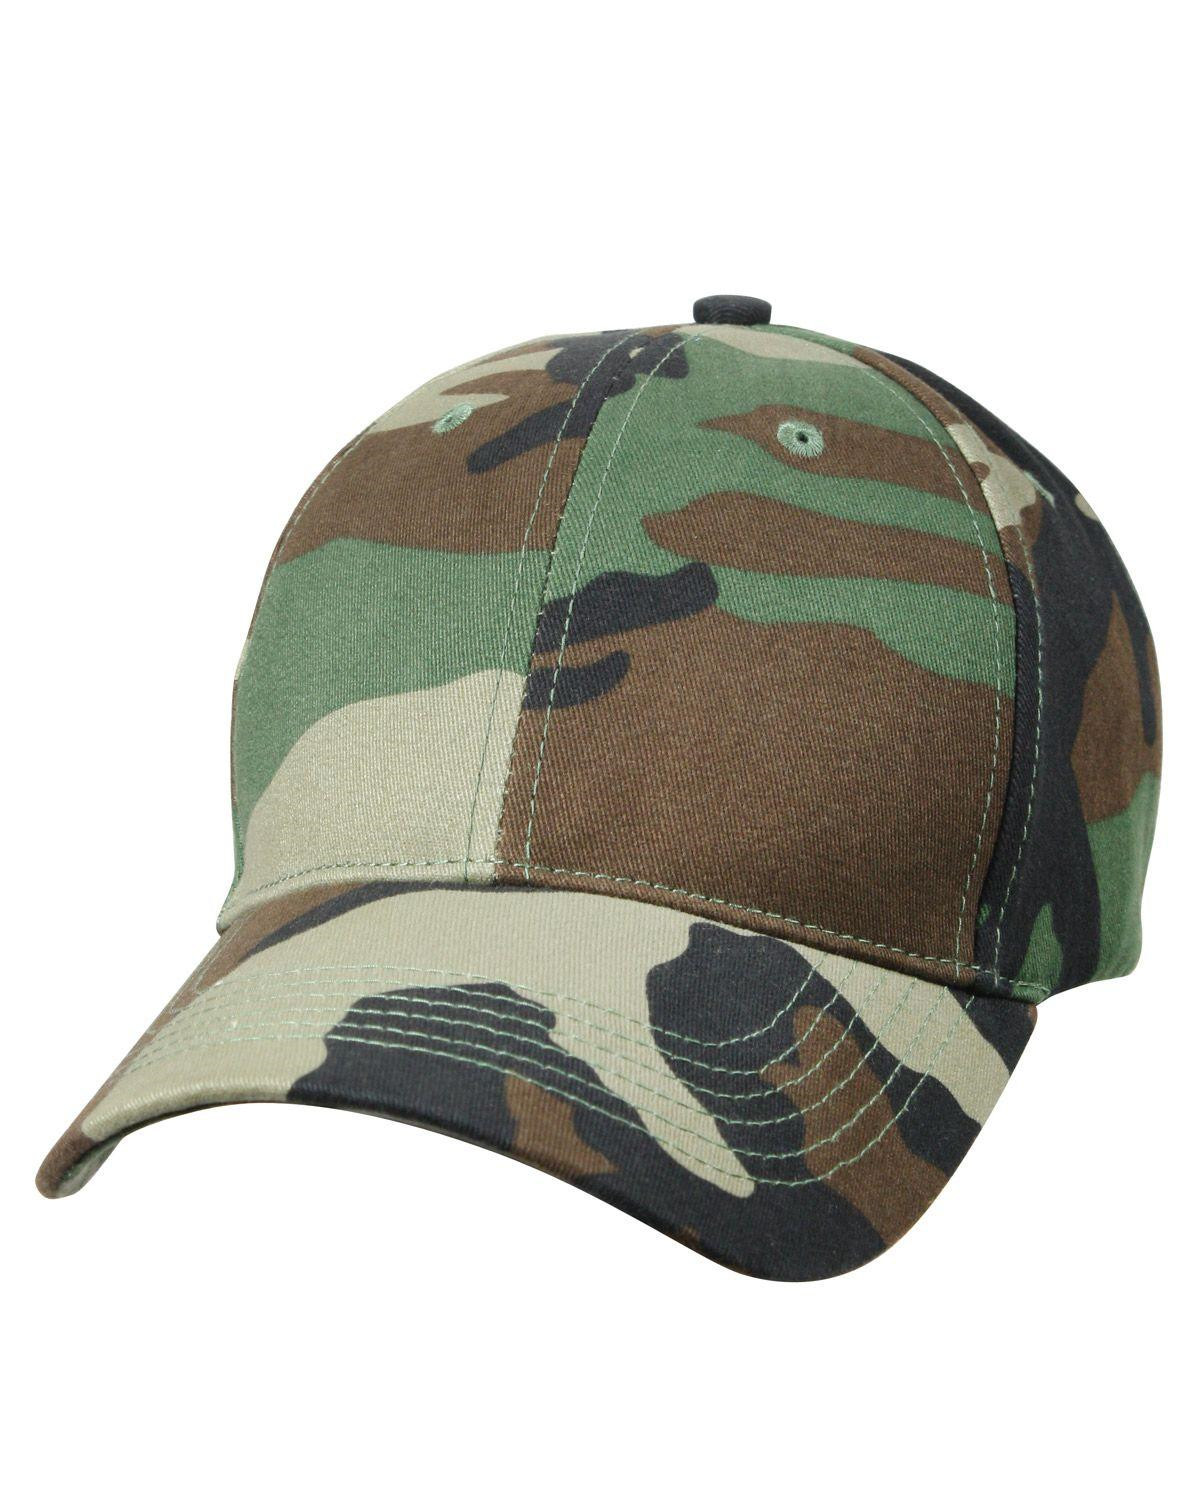 Rothco Low Profile Cap (Woodland, One Size)